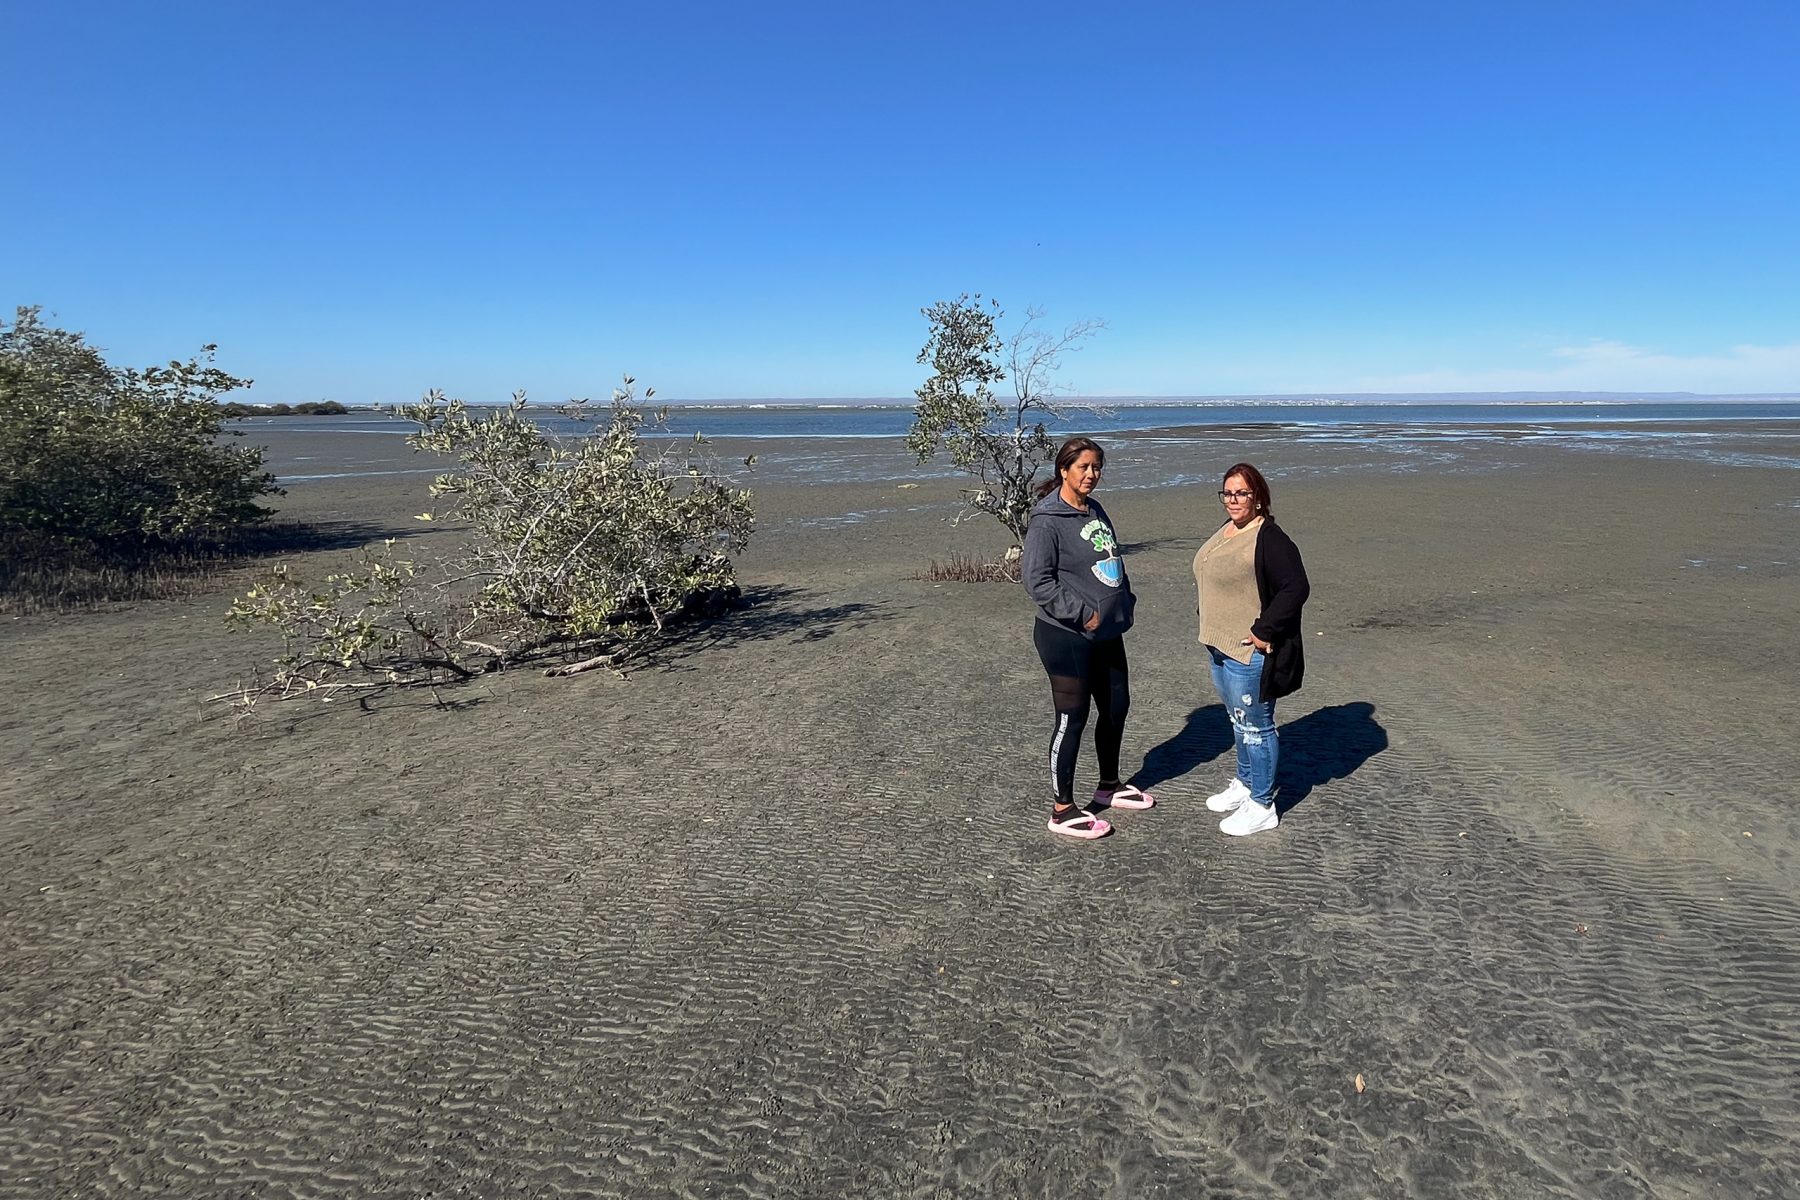 Two women standing on a beach near some mangrove trees